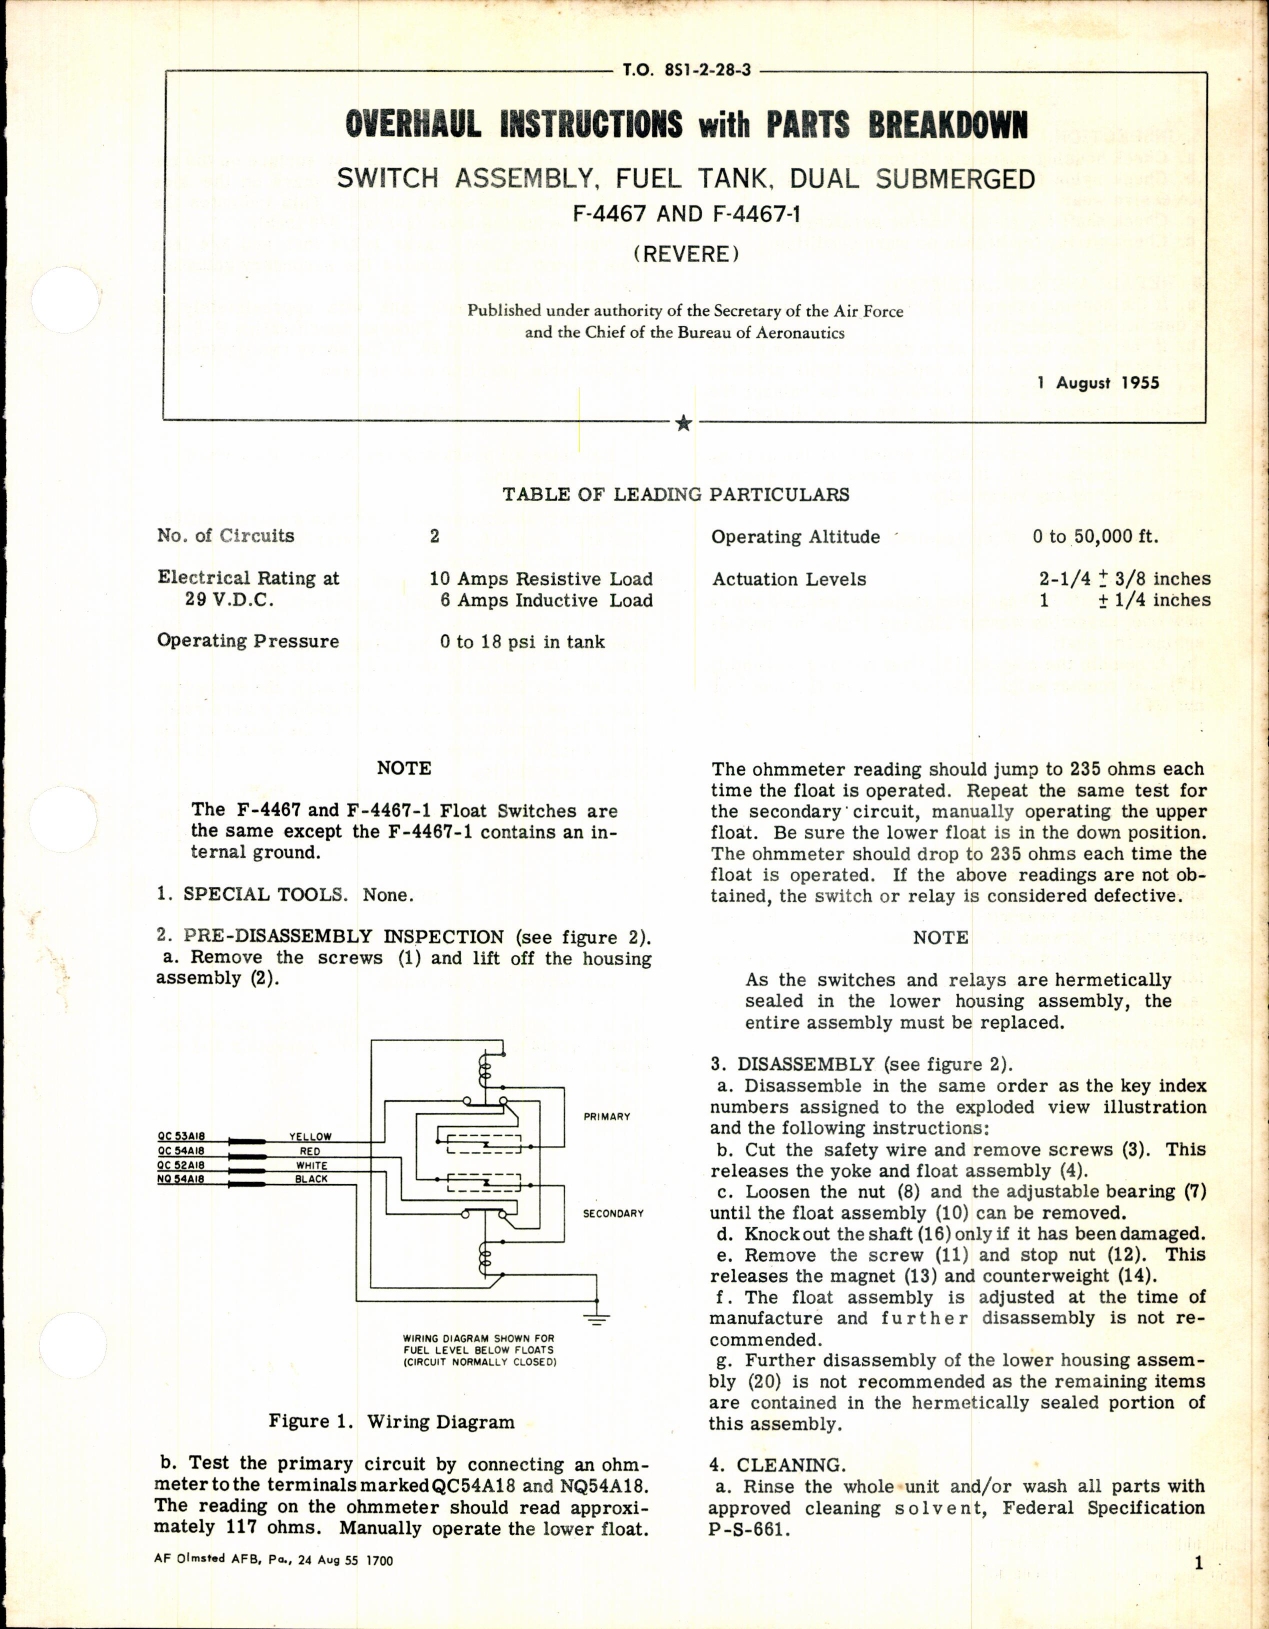 Sample page 1 from AirCorps Library document: Switch Assembly, Fuel Tank, Dual Submerged 